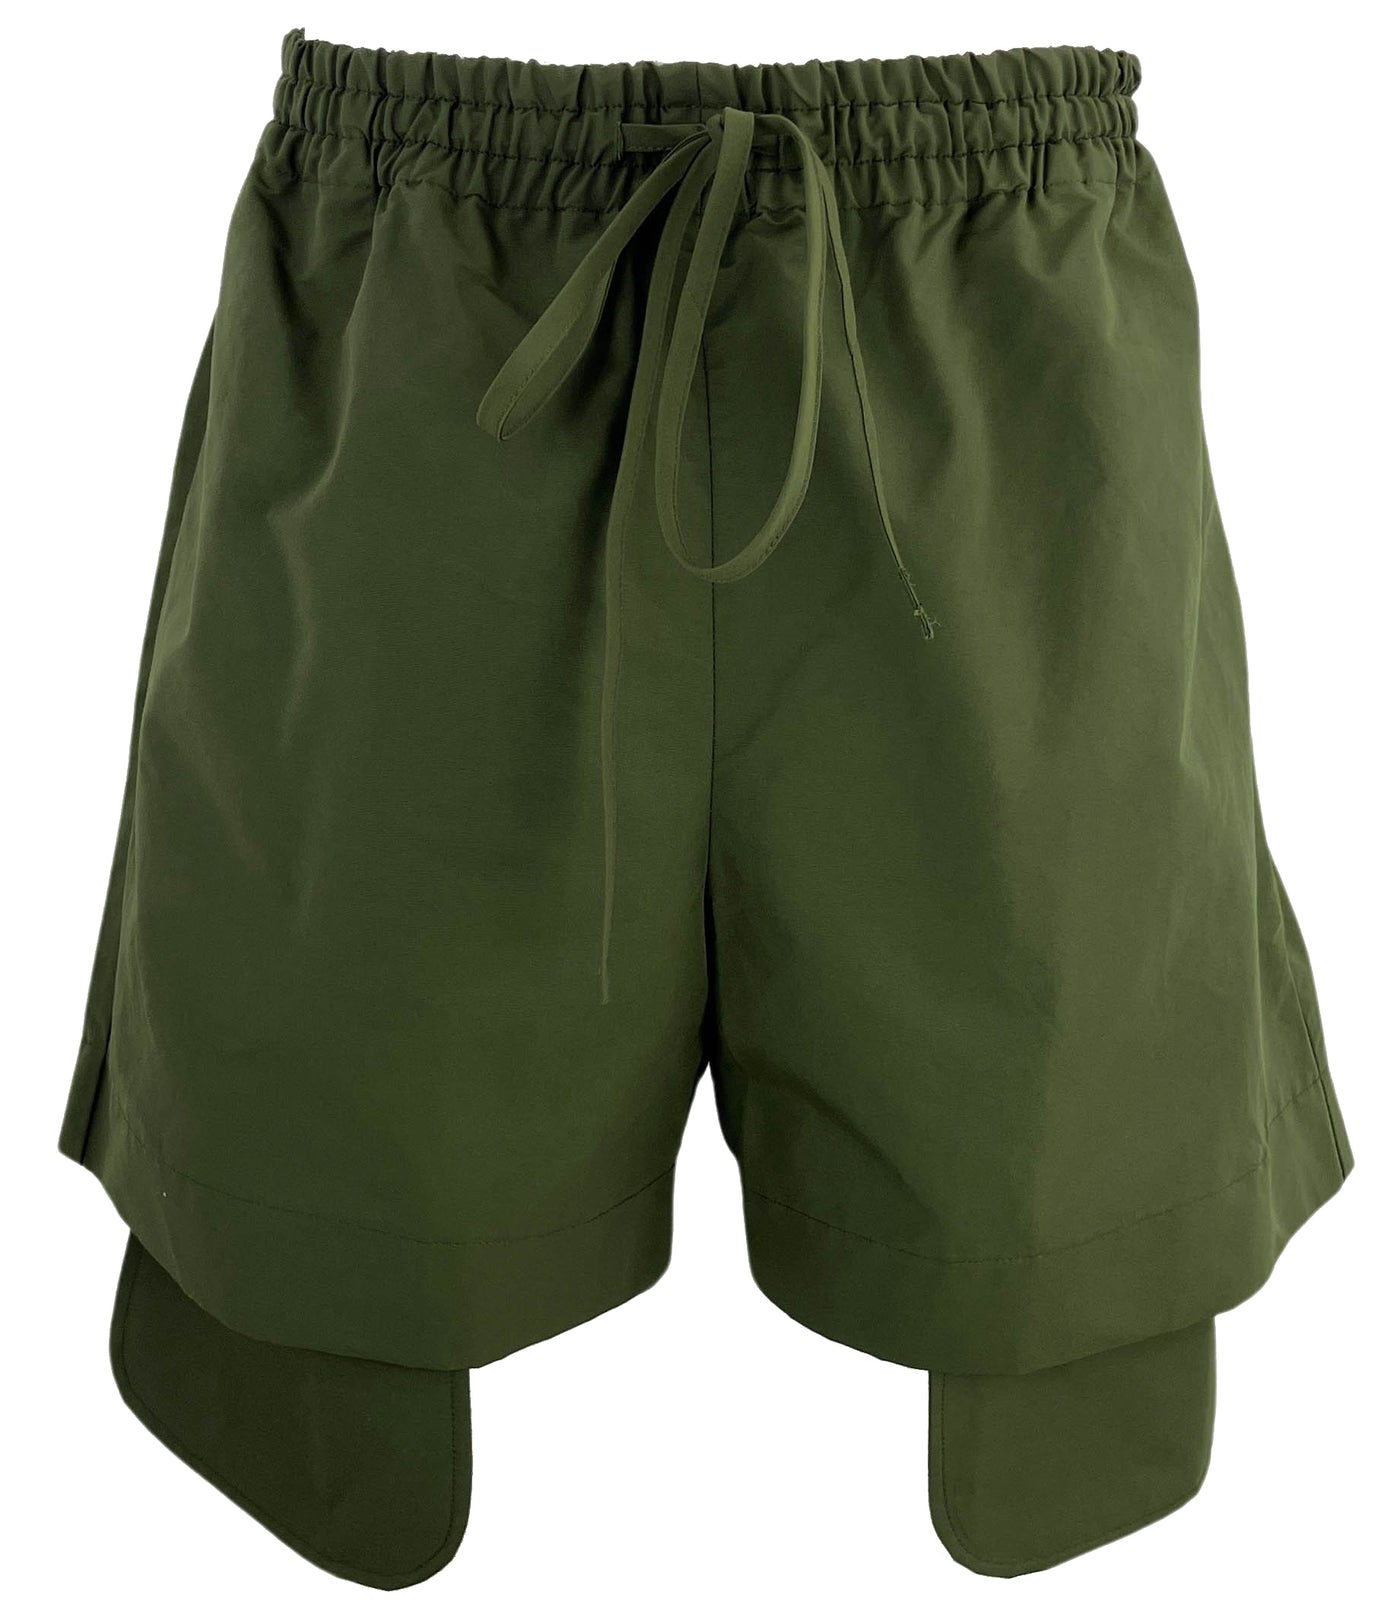 A.Potts Parachute Pocket Shorts in Olive - Discounts on A.Potts at UAL